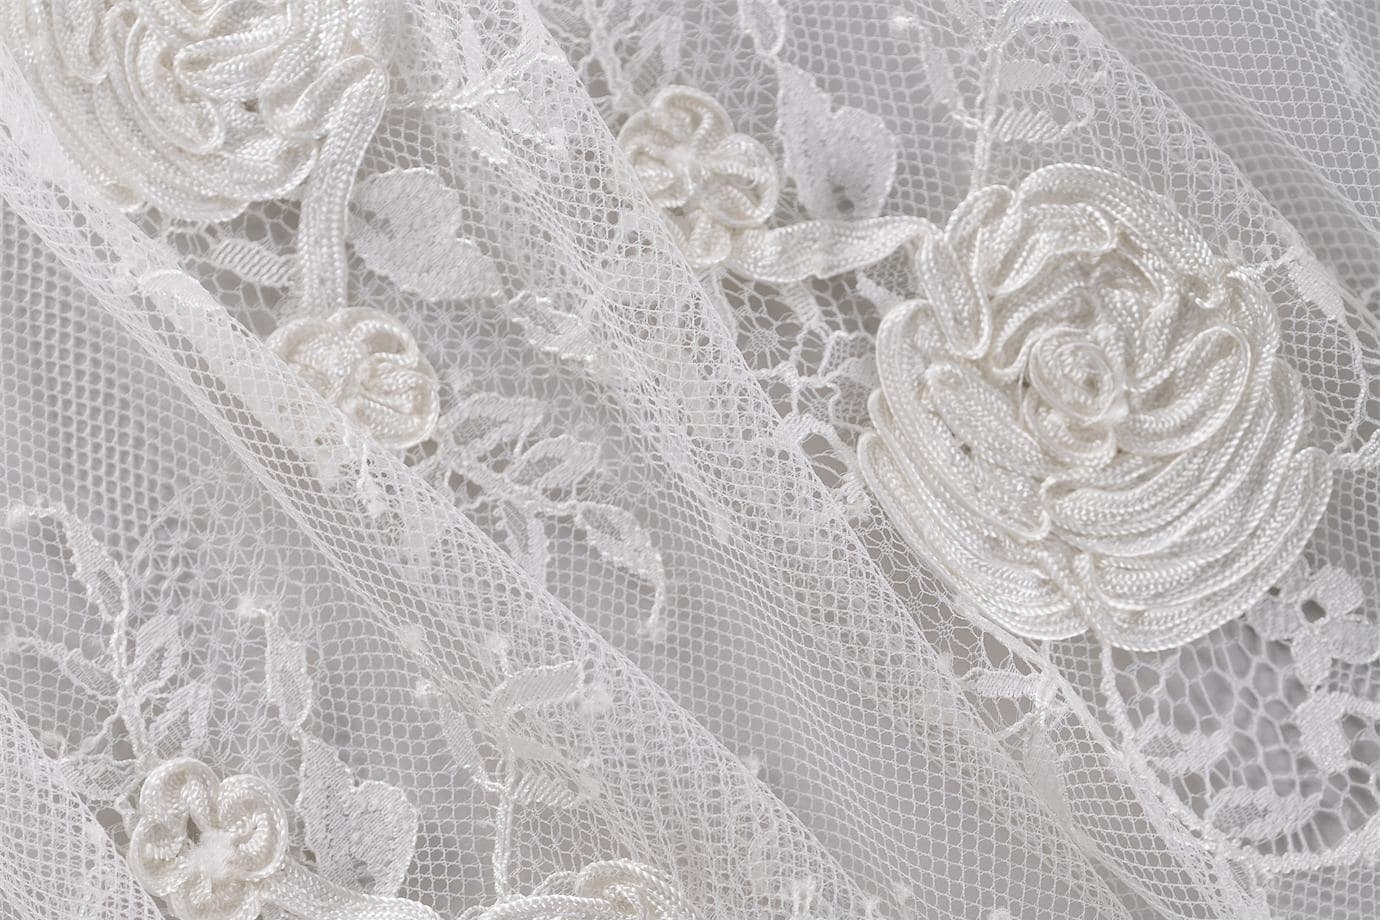 Ivory rebrode lace with floral pattern | new tess bridal fabrics